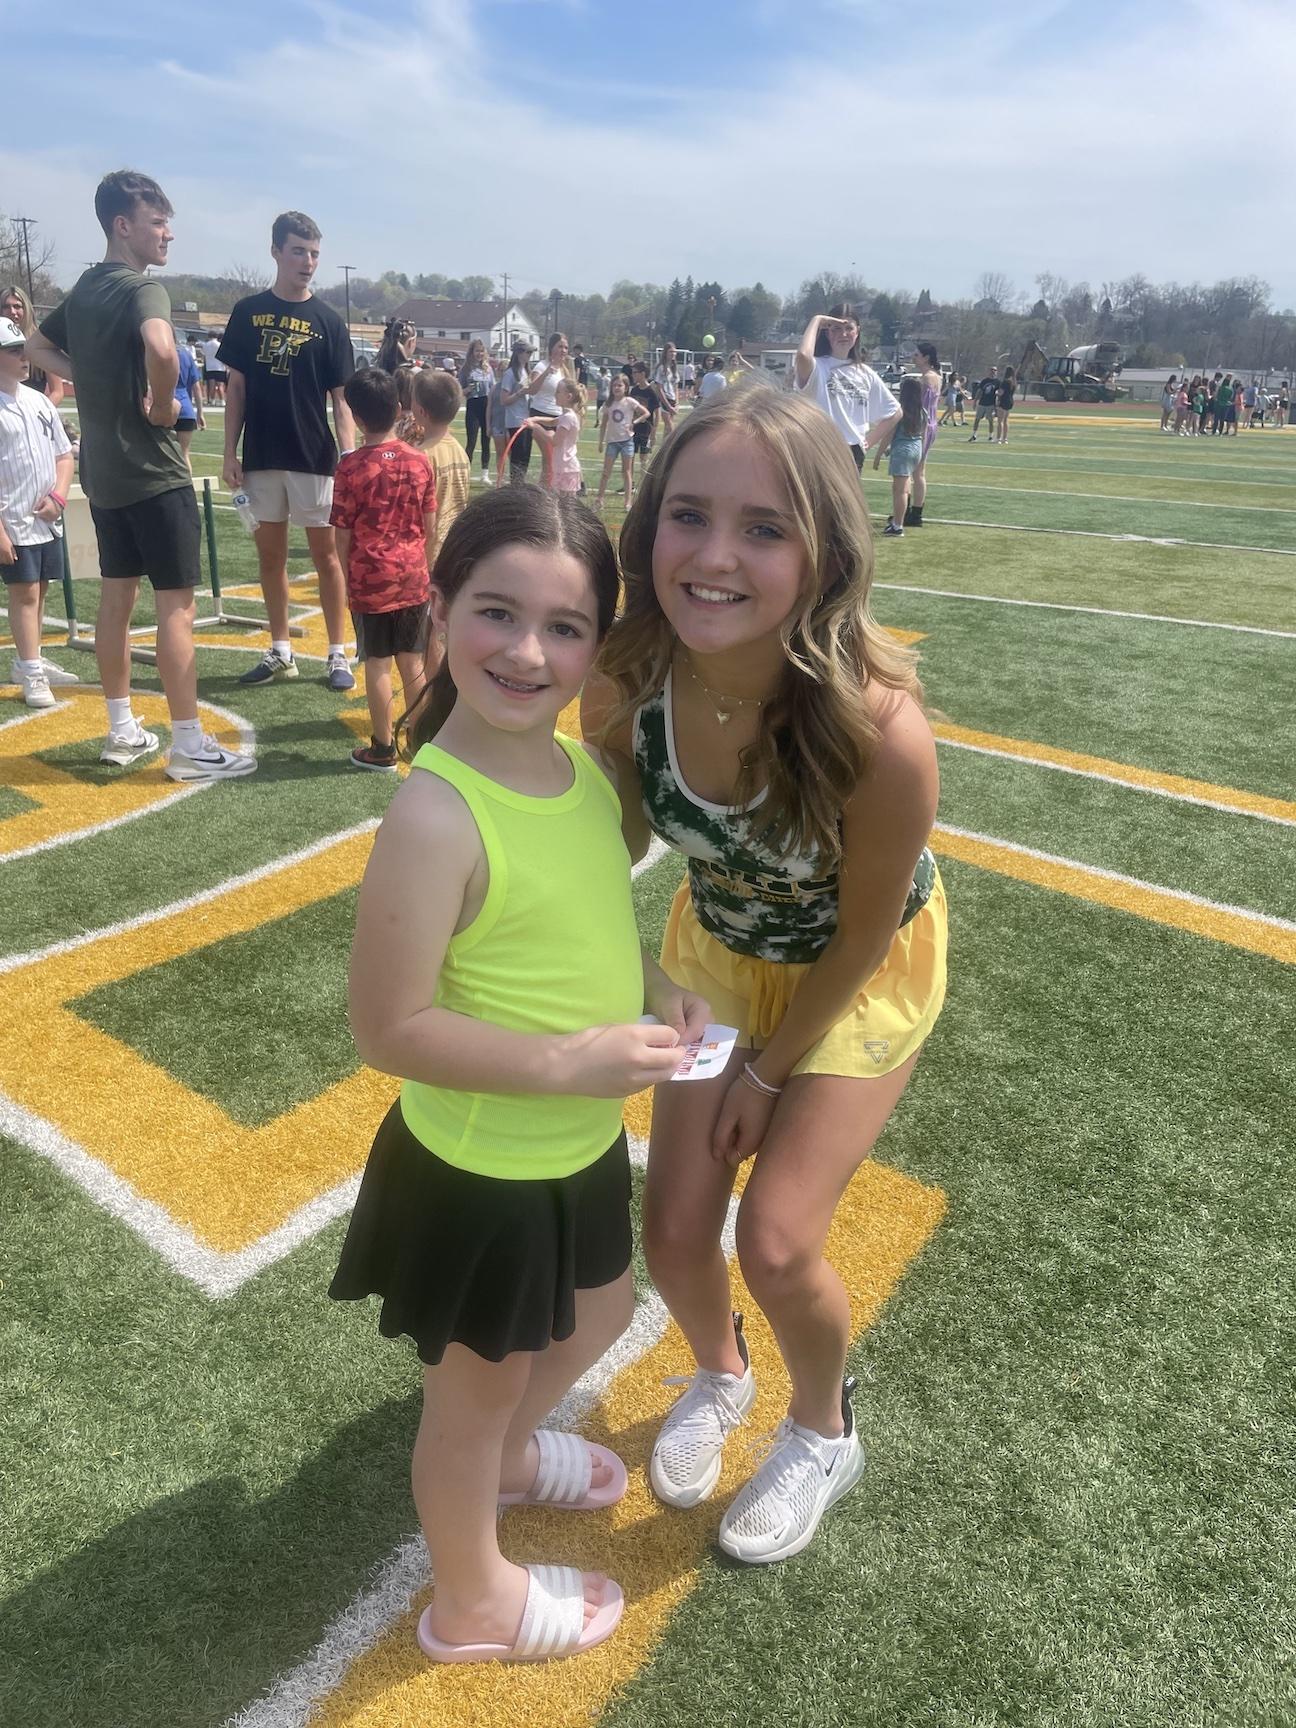 Sophia Colecchi (Level Green) and her big buddy, Brynlee Echard